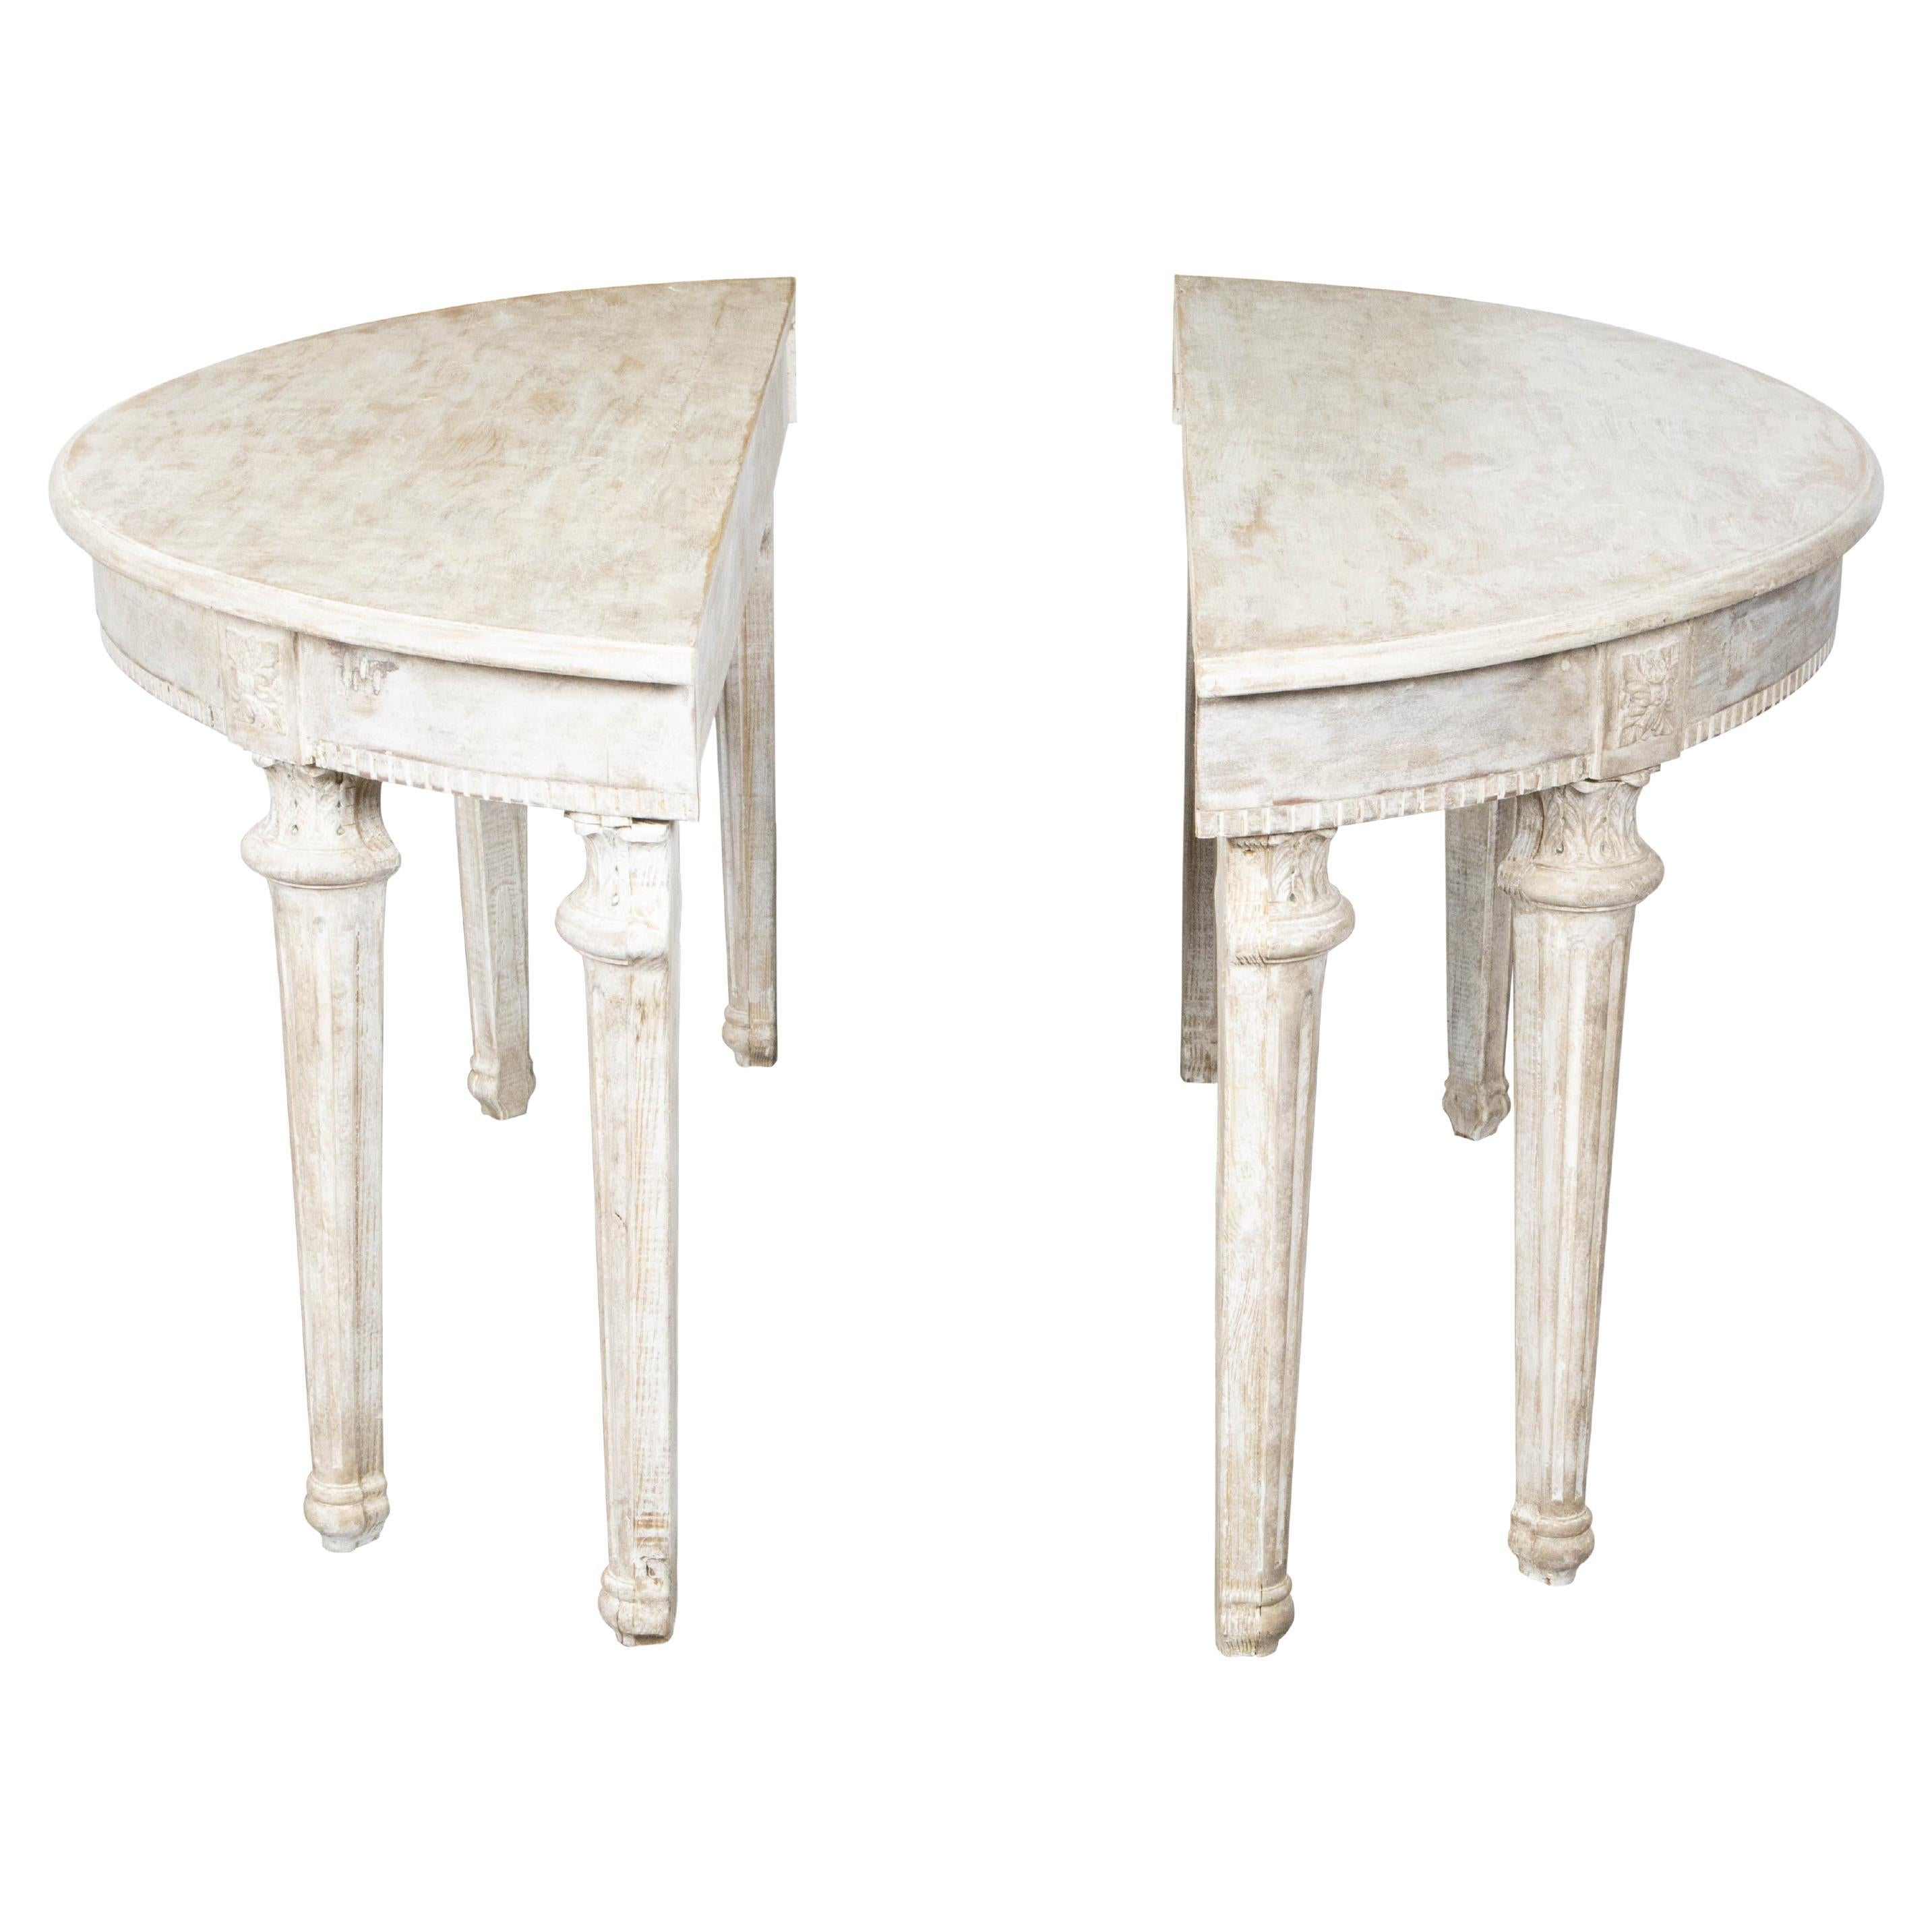 Pair of French Neoclassical Style 1880s Demilune Tables with Carved Décor For Sale